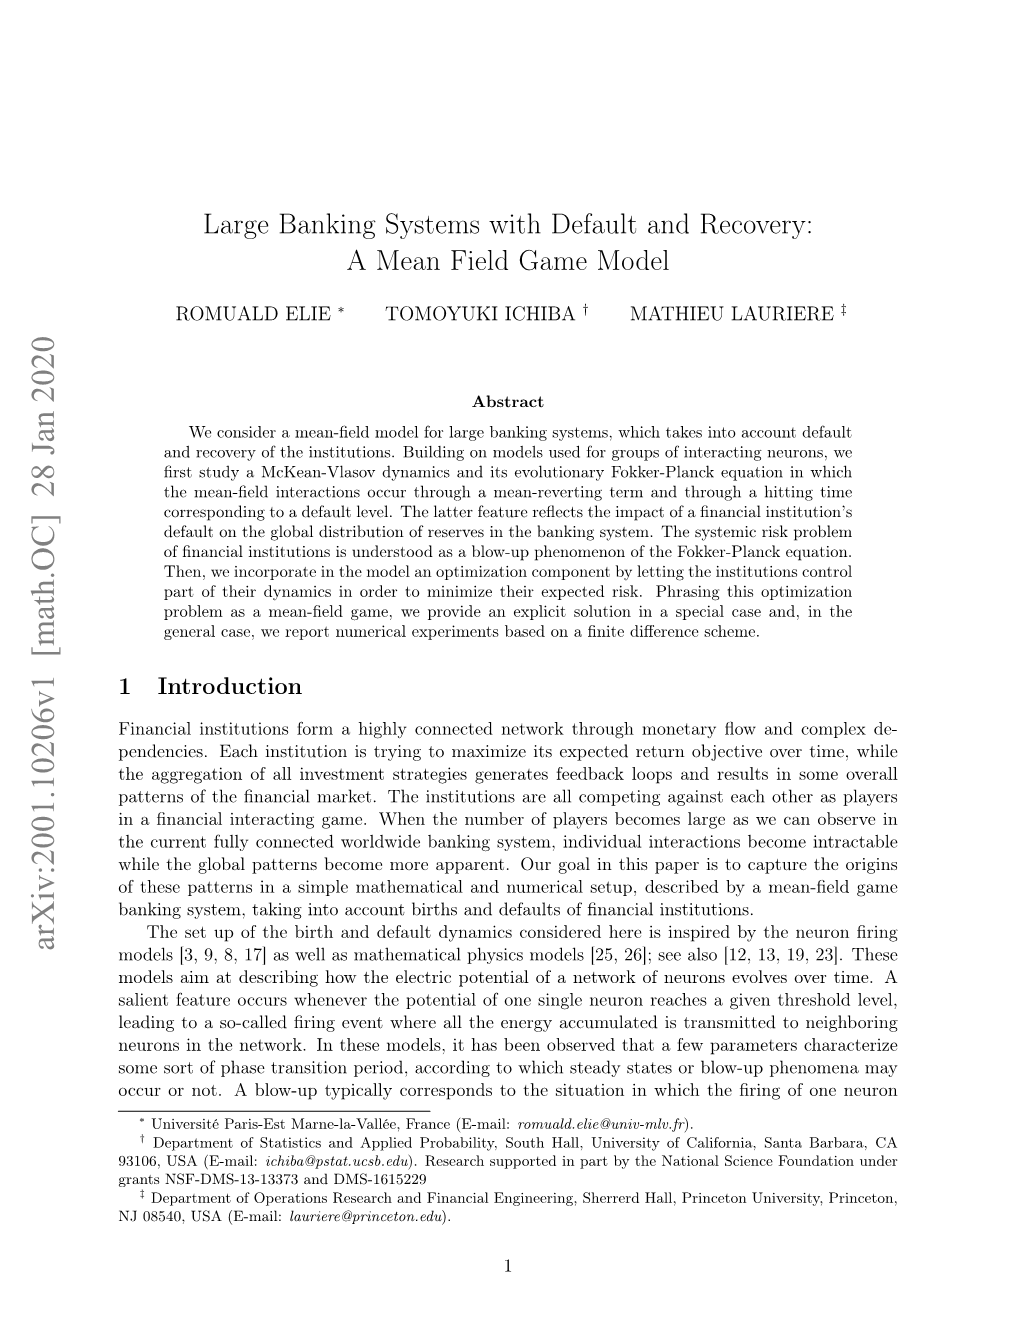 Large Banking Systems with Default and Recovery: a Mean Field Game Model